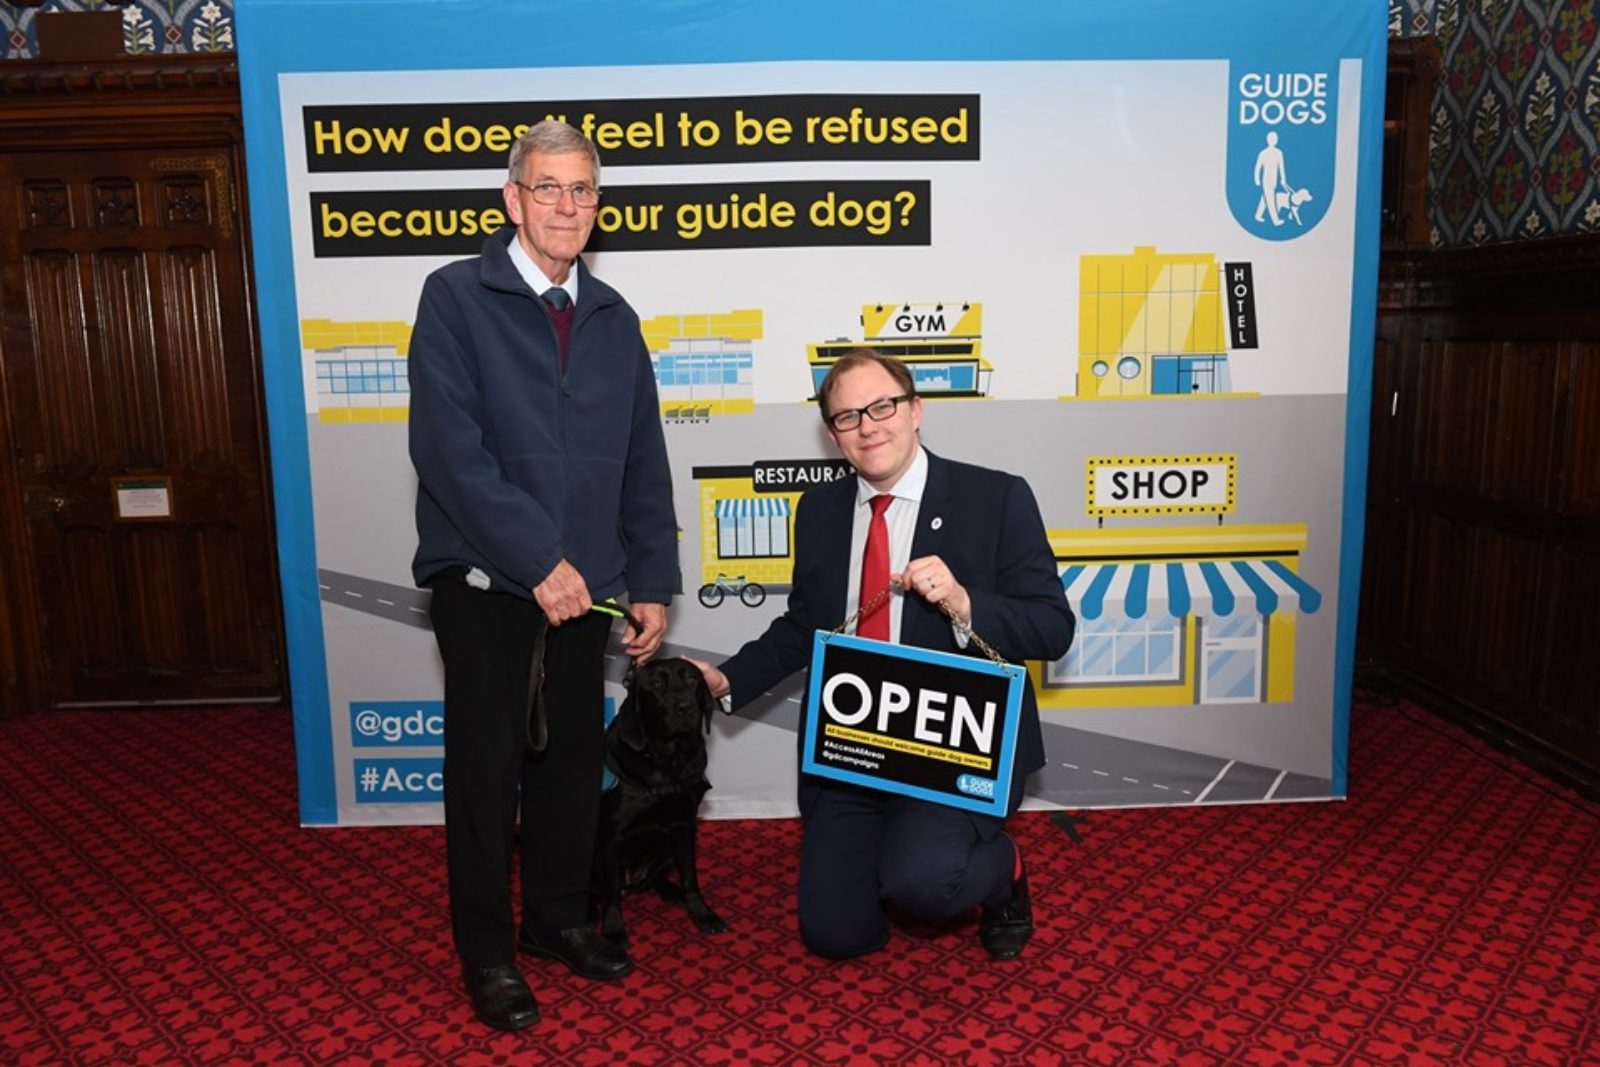 Gareth with guide dogs